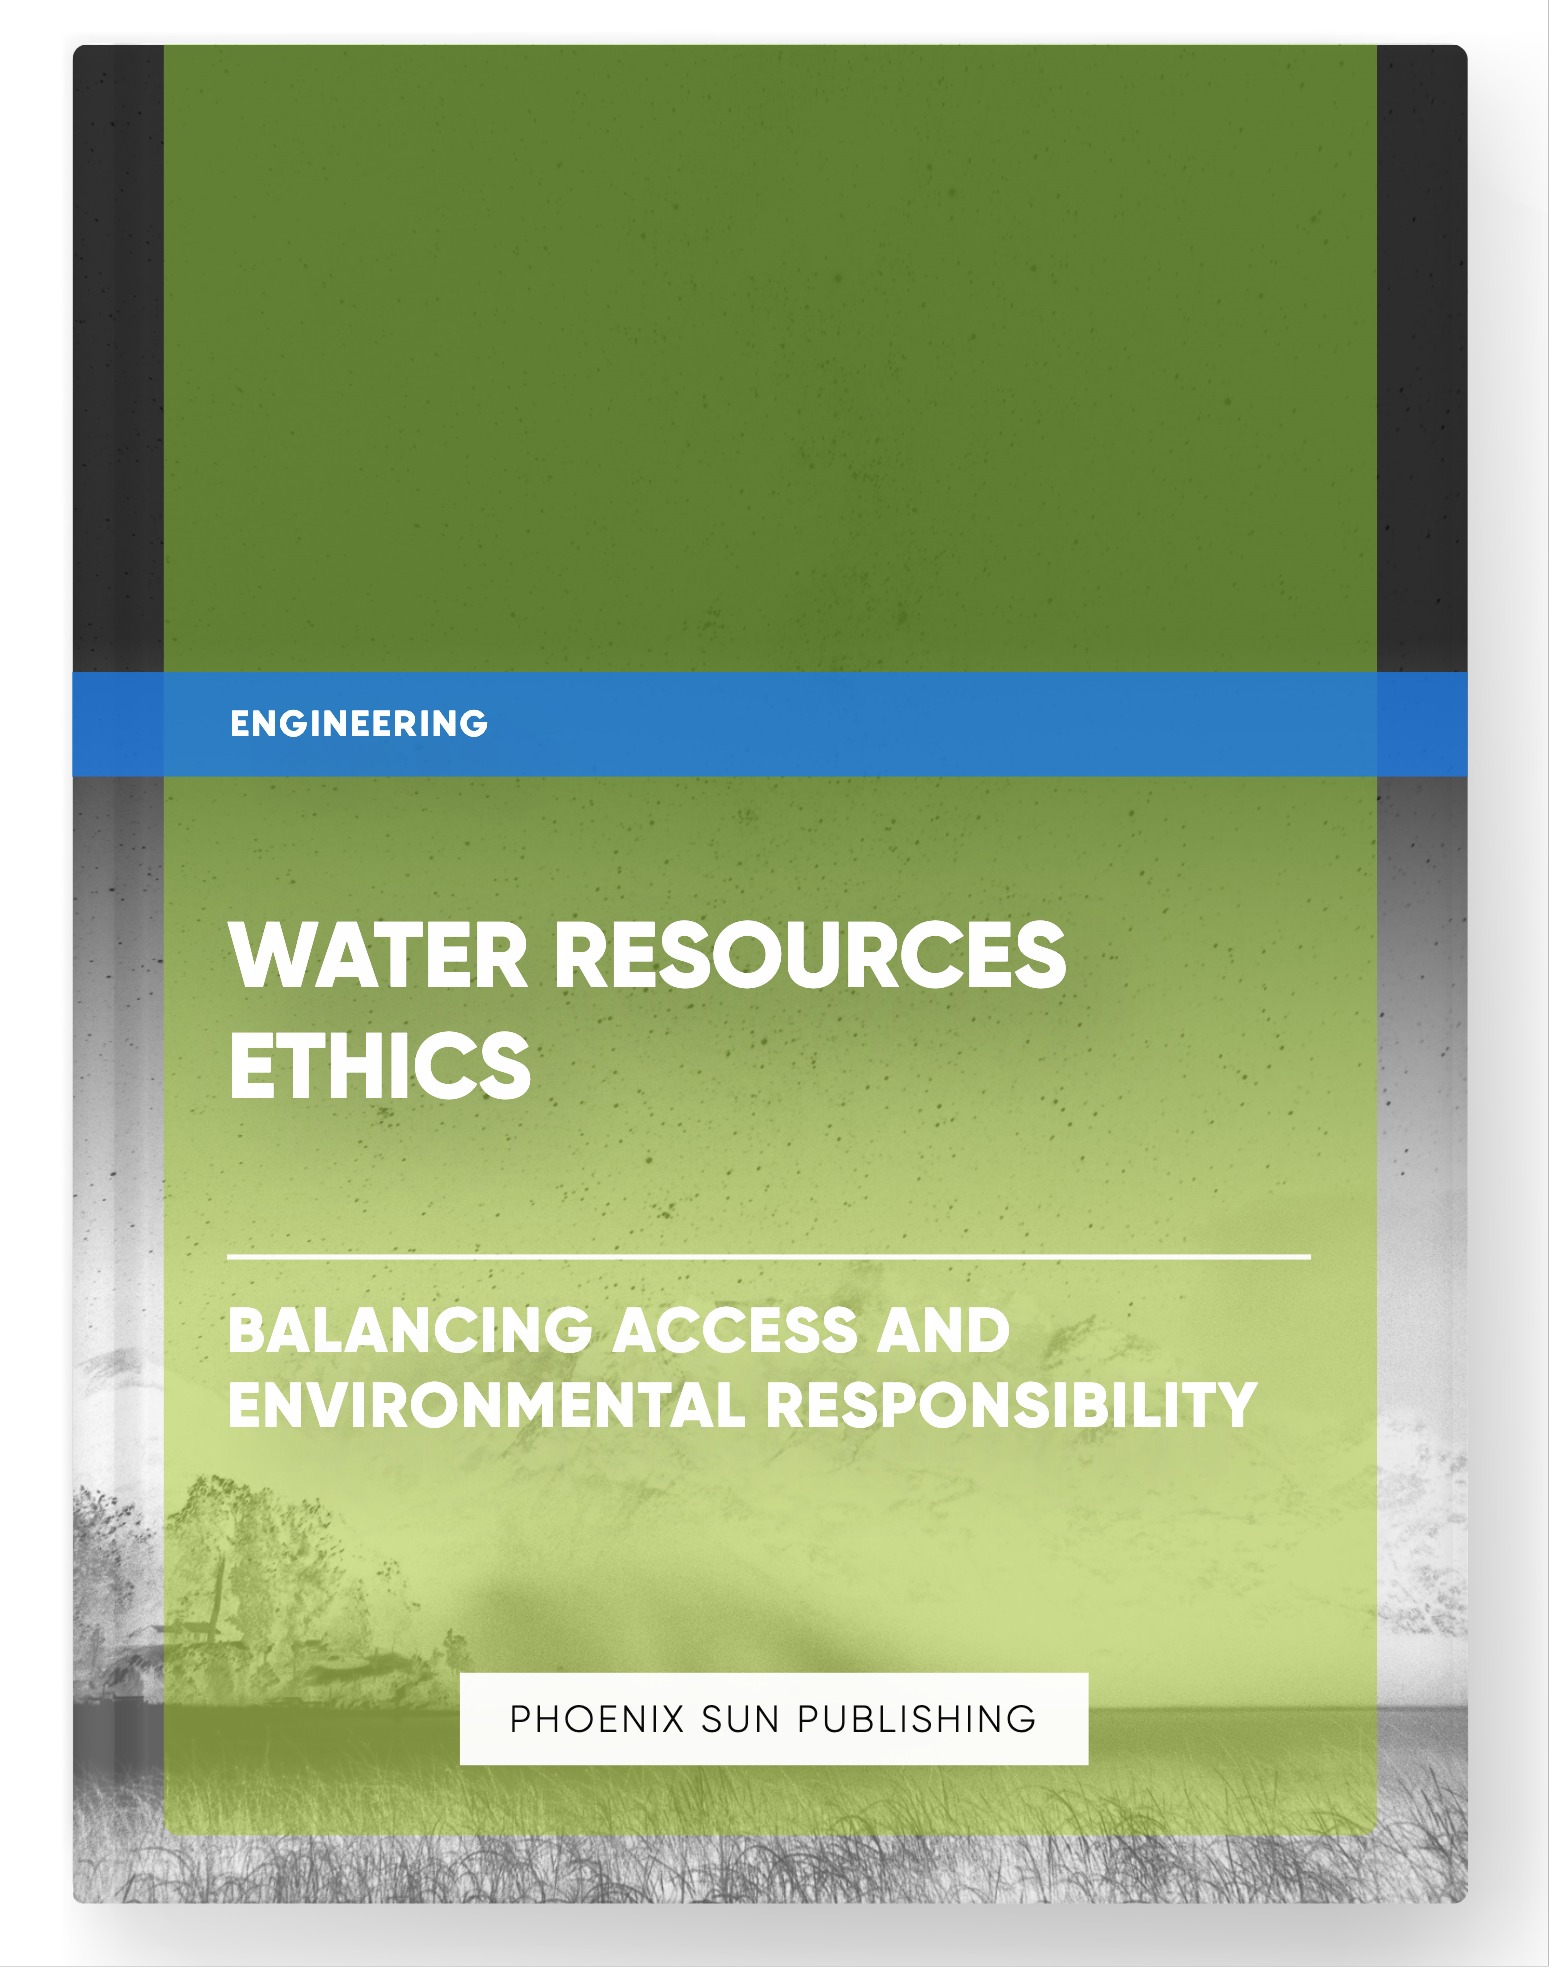 Water Resources Ethics – Balancing Access and Environmental Responsibility